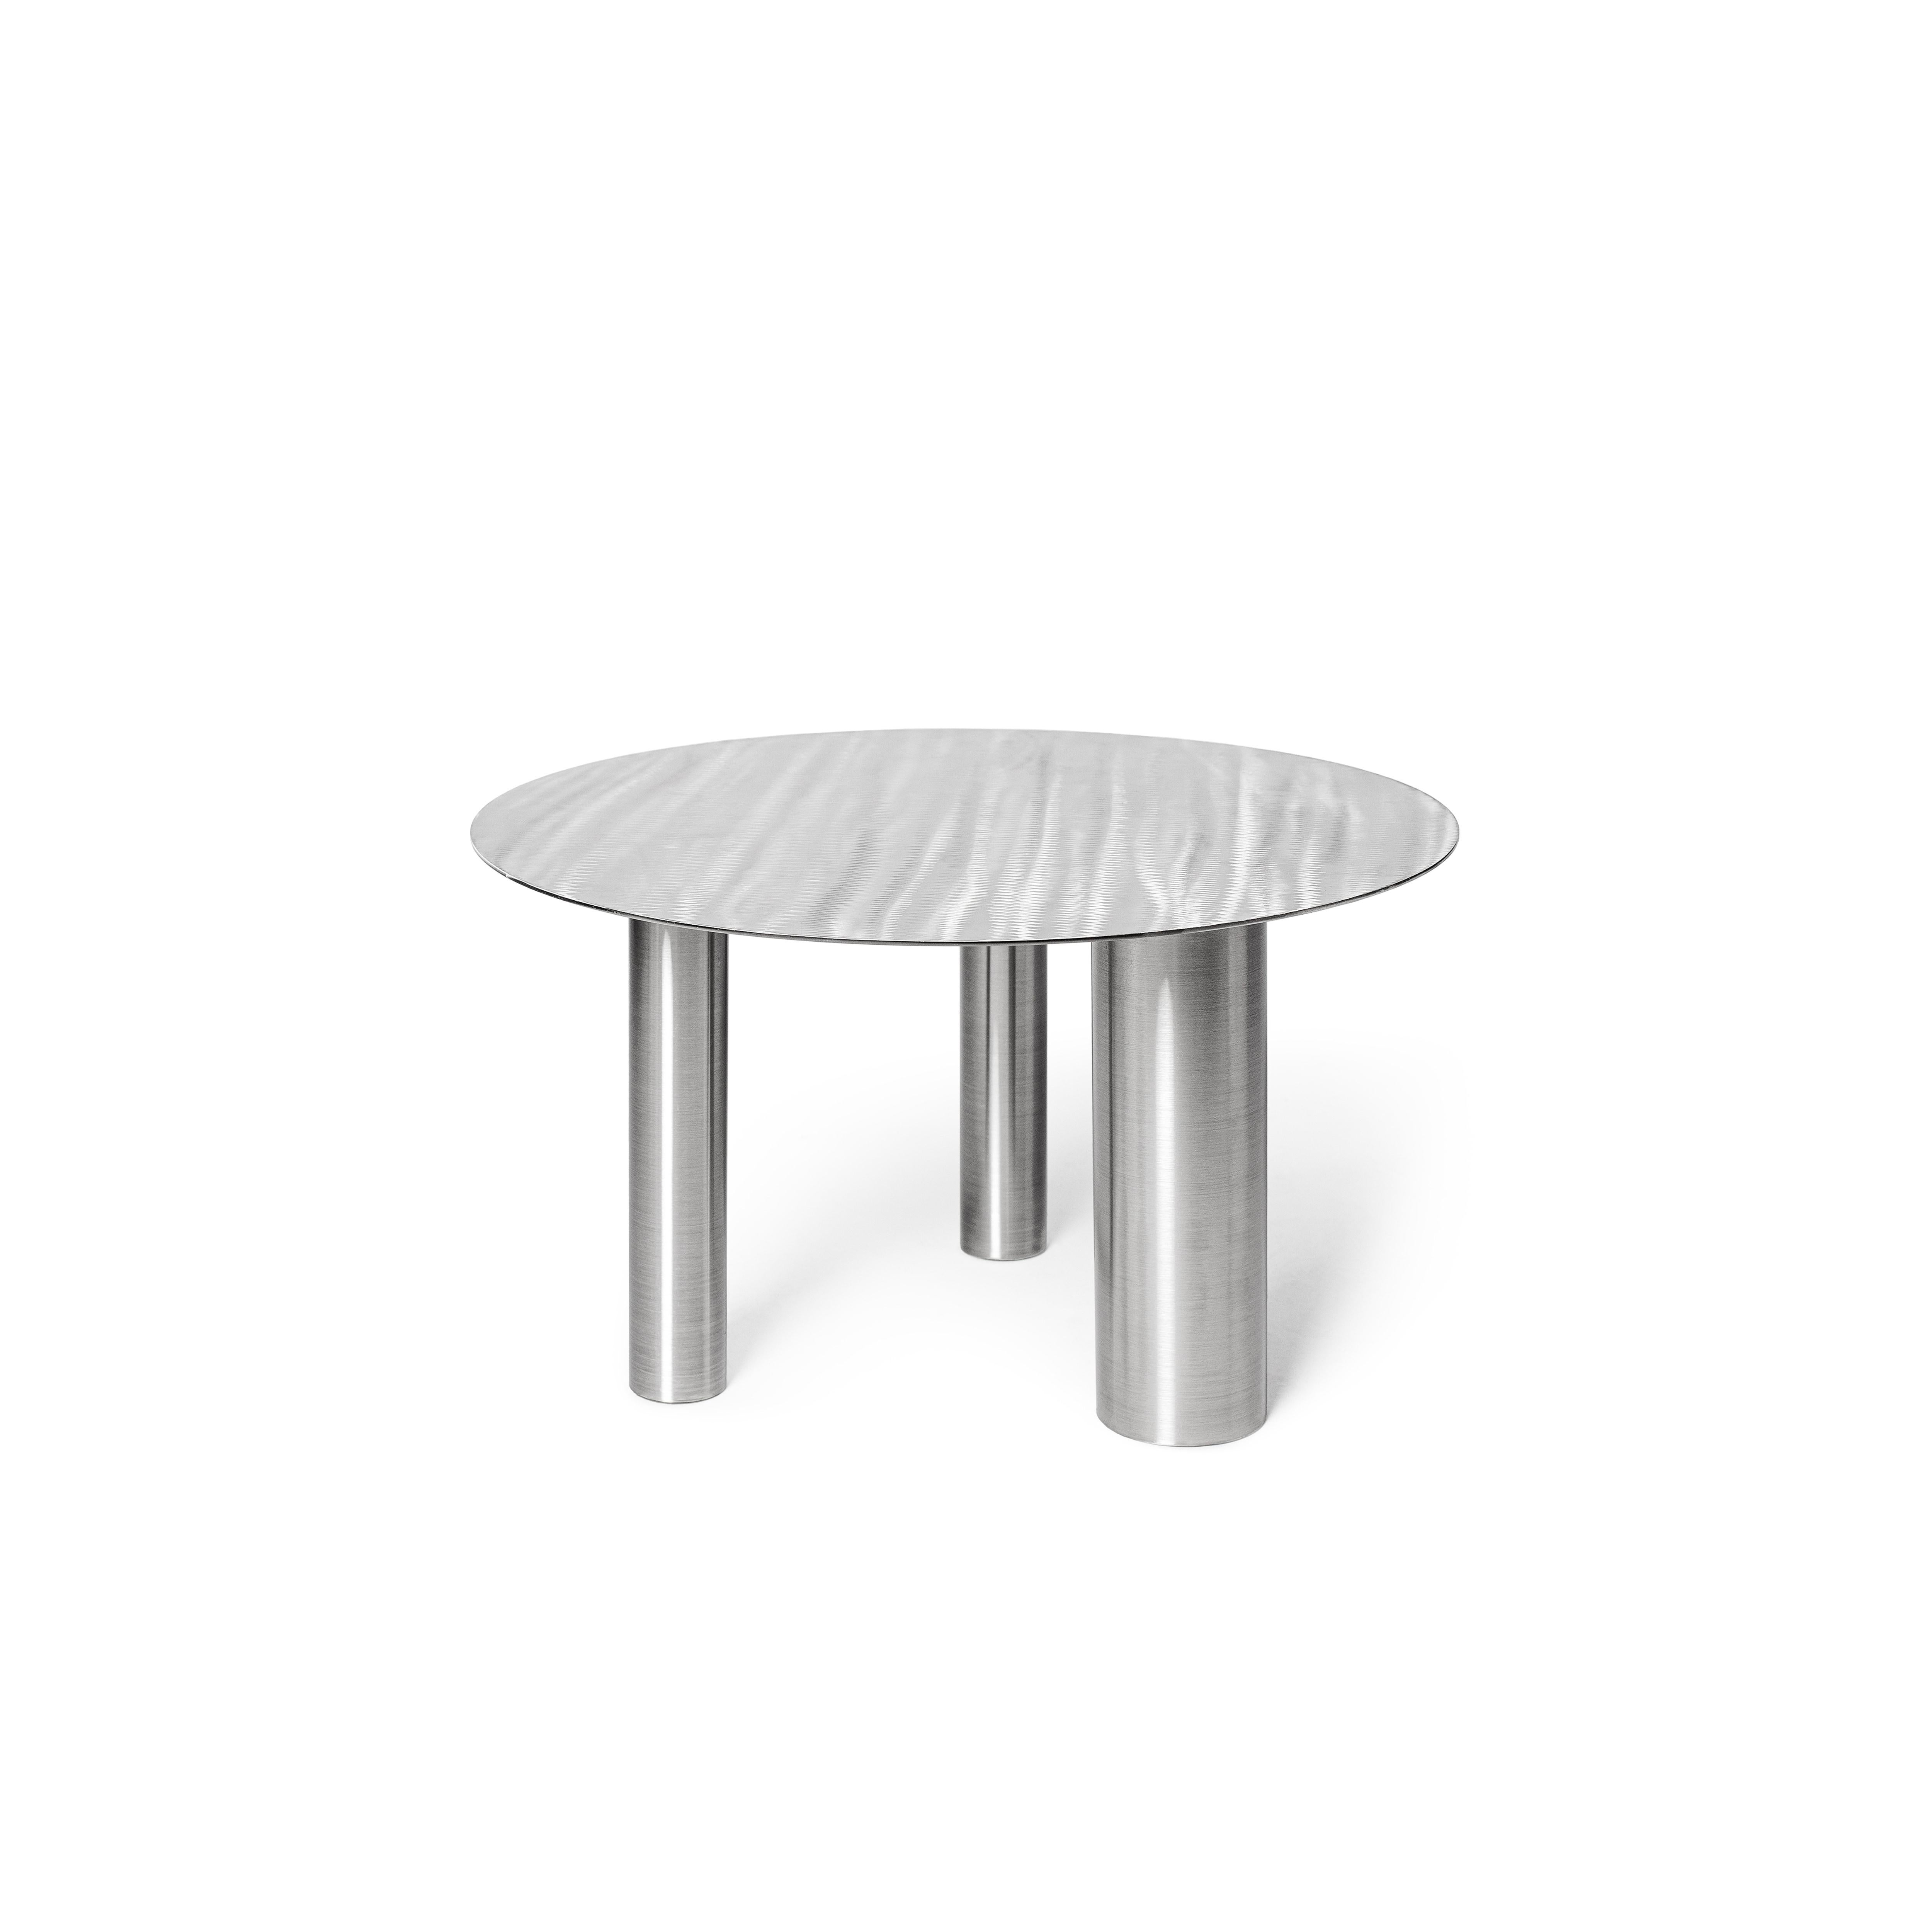 Set of Two Modern Coffee Tables Brandt CS1 made of Stainless Steel by NOOM 9